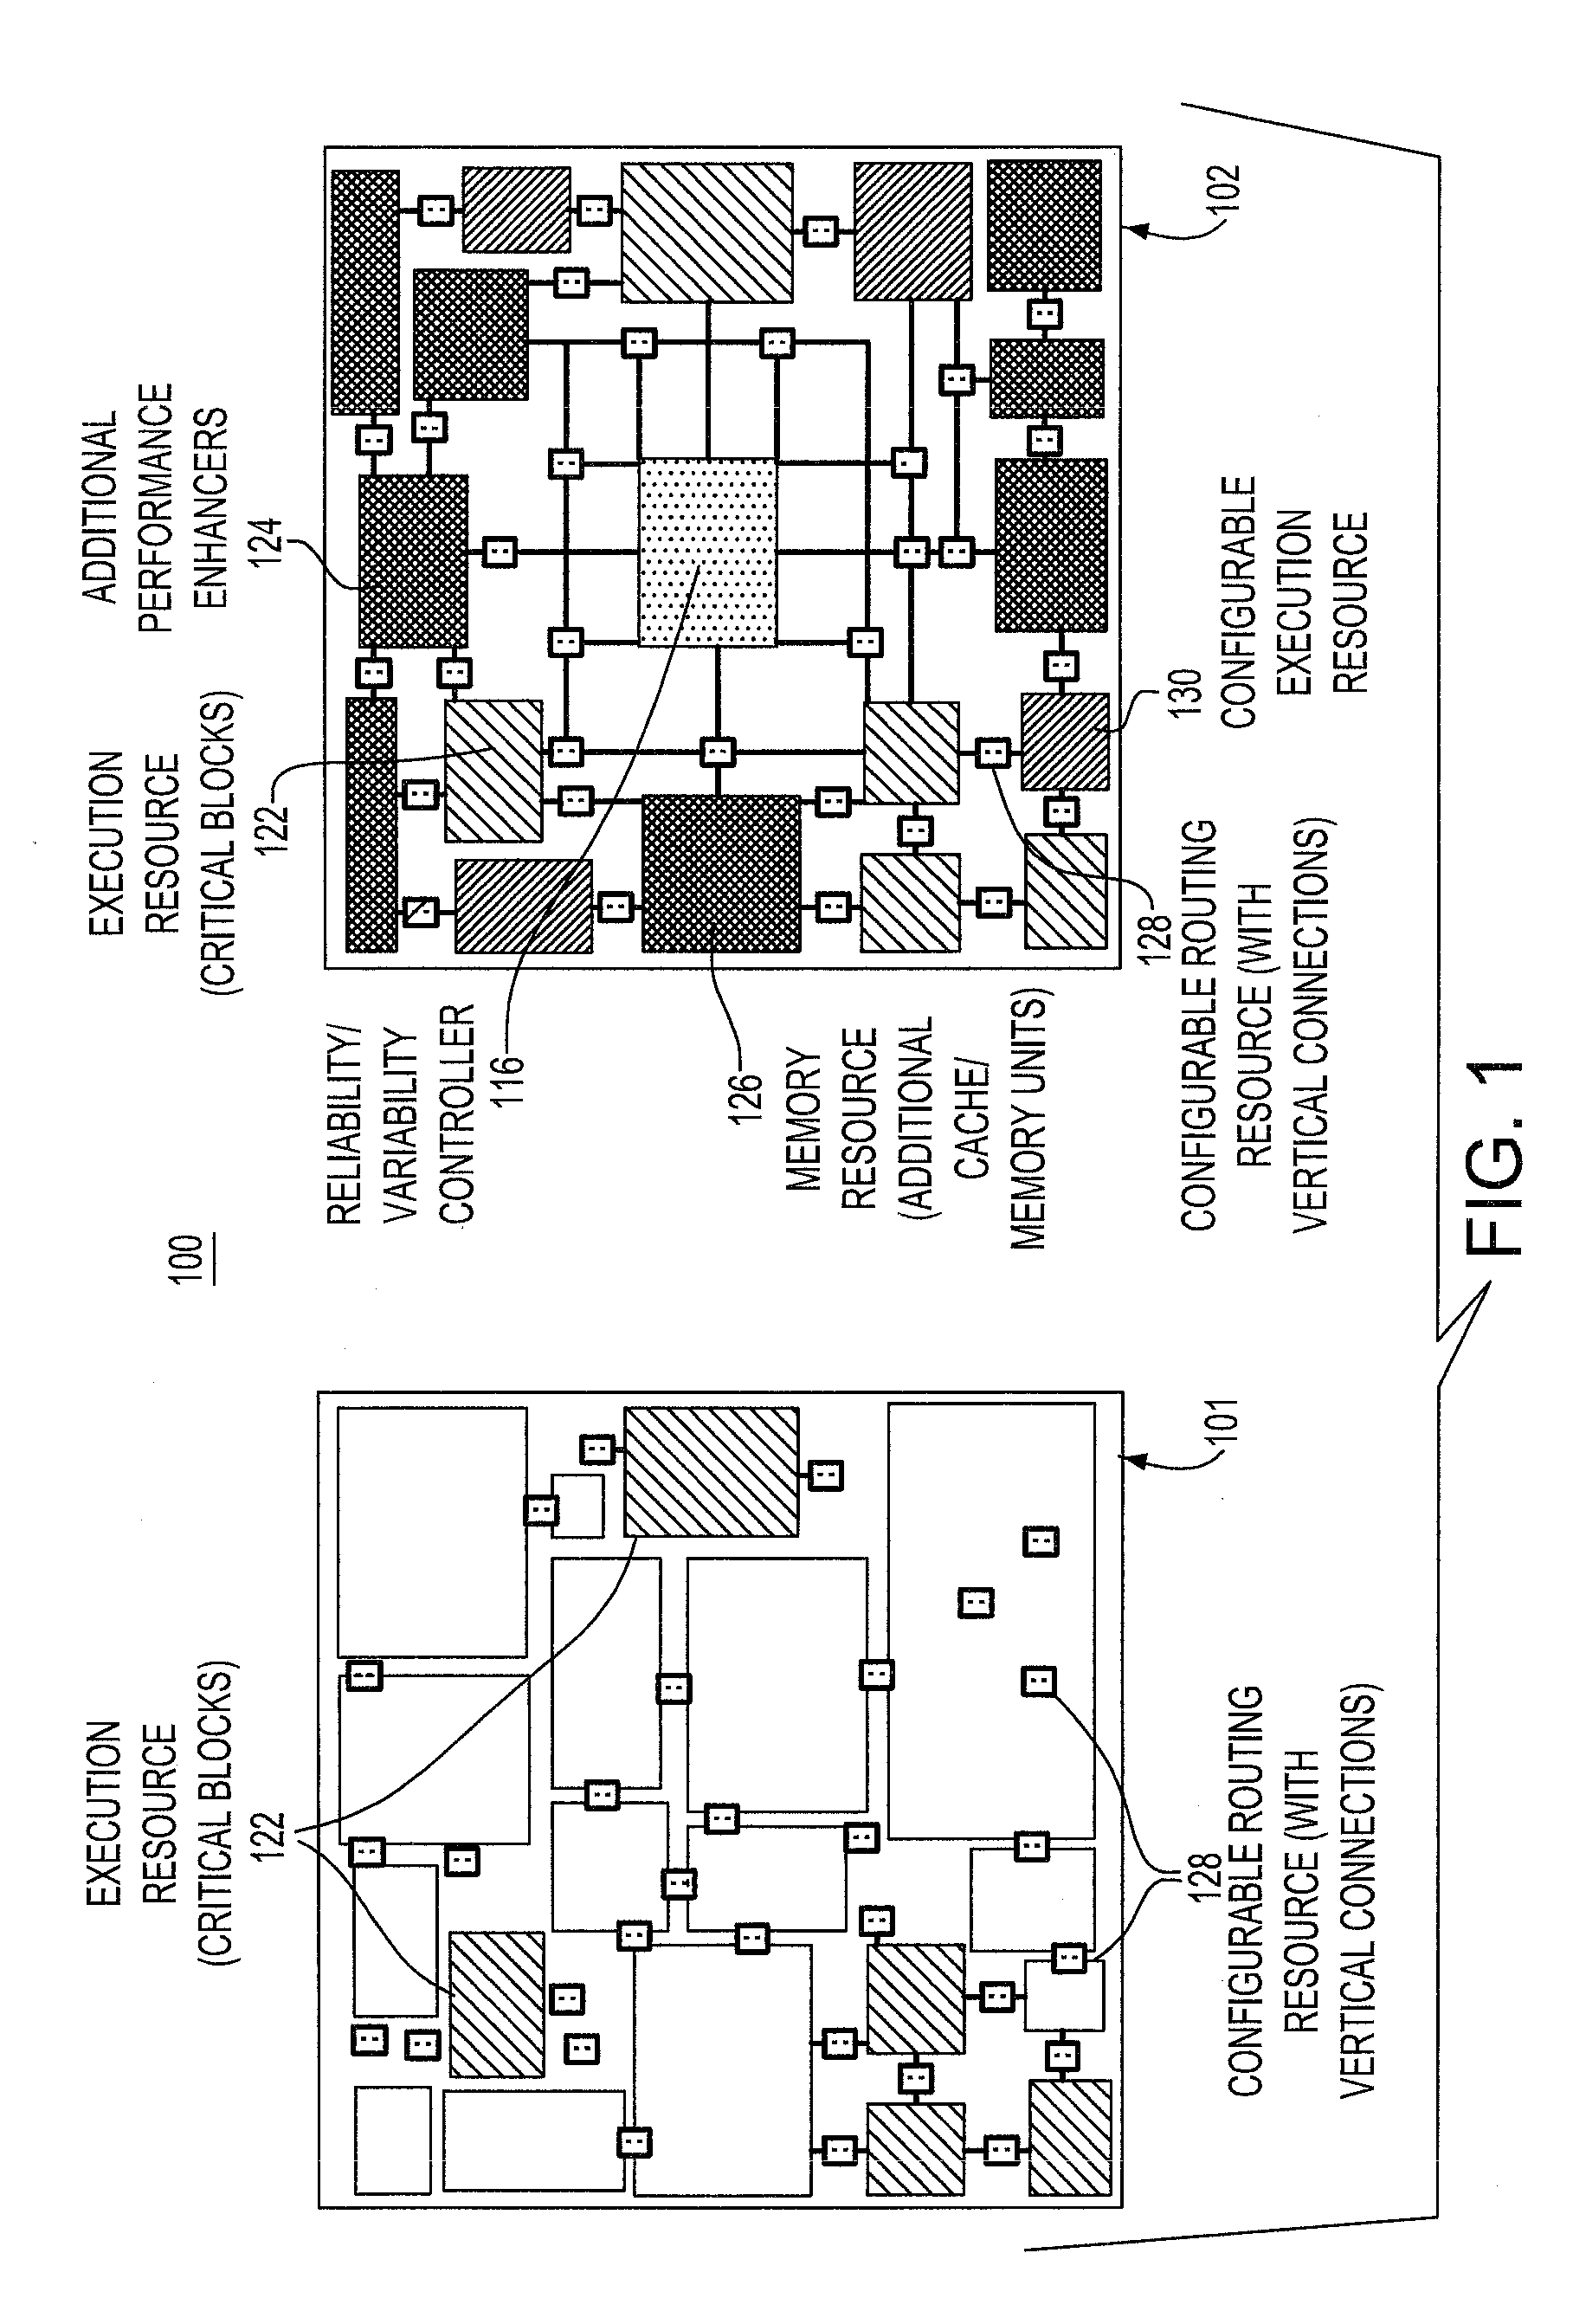 Method and arrangement for enhancing process variability and lifetime reliability through 3D integration